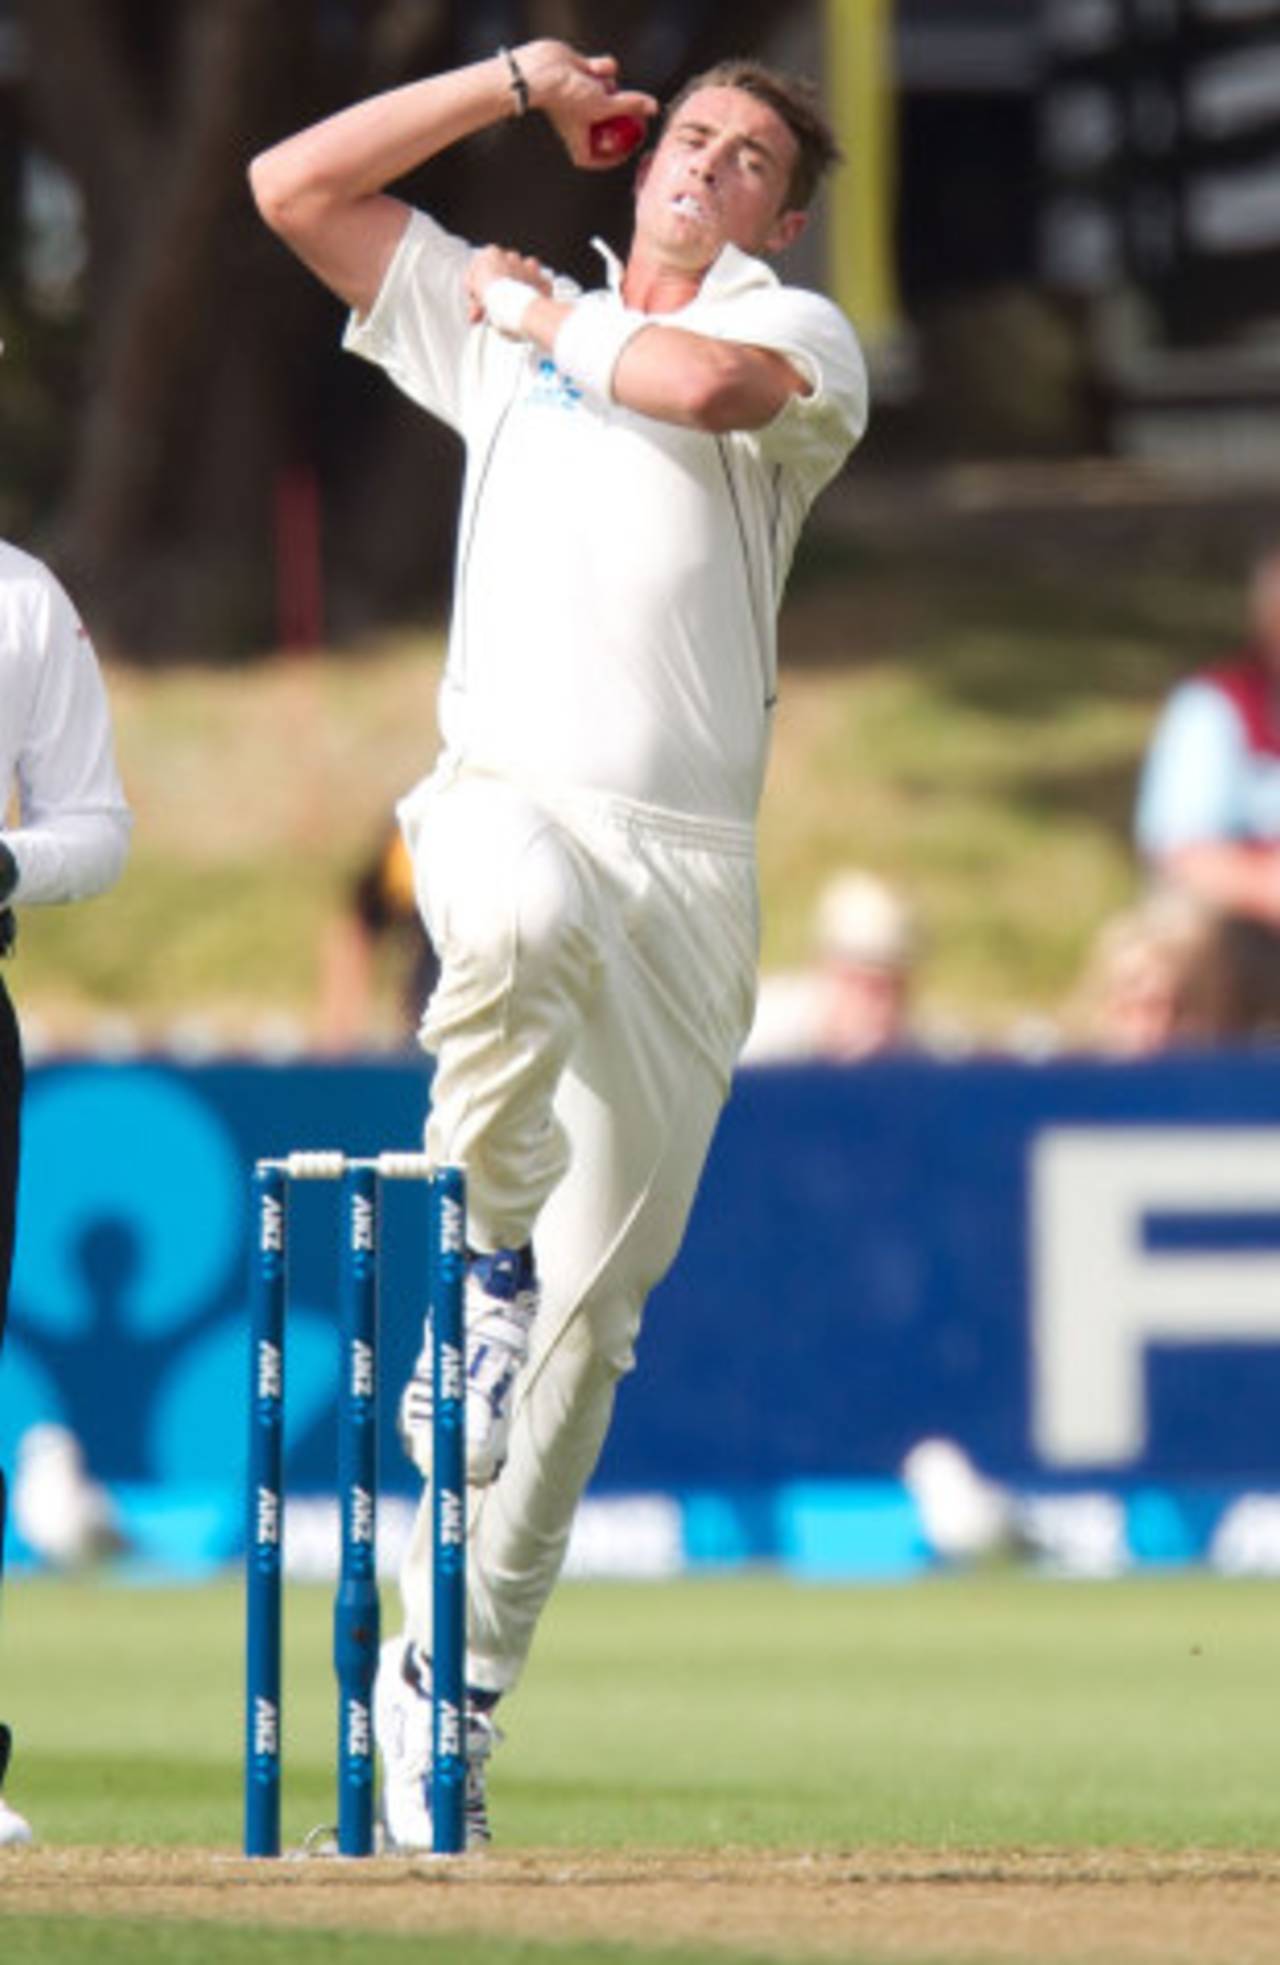 Tim Southee in his bowling stride, New Zealand v England, 2nd Test, Wellington, 1st day, March 14, 2013